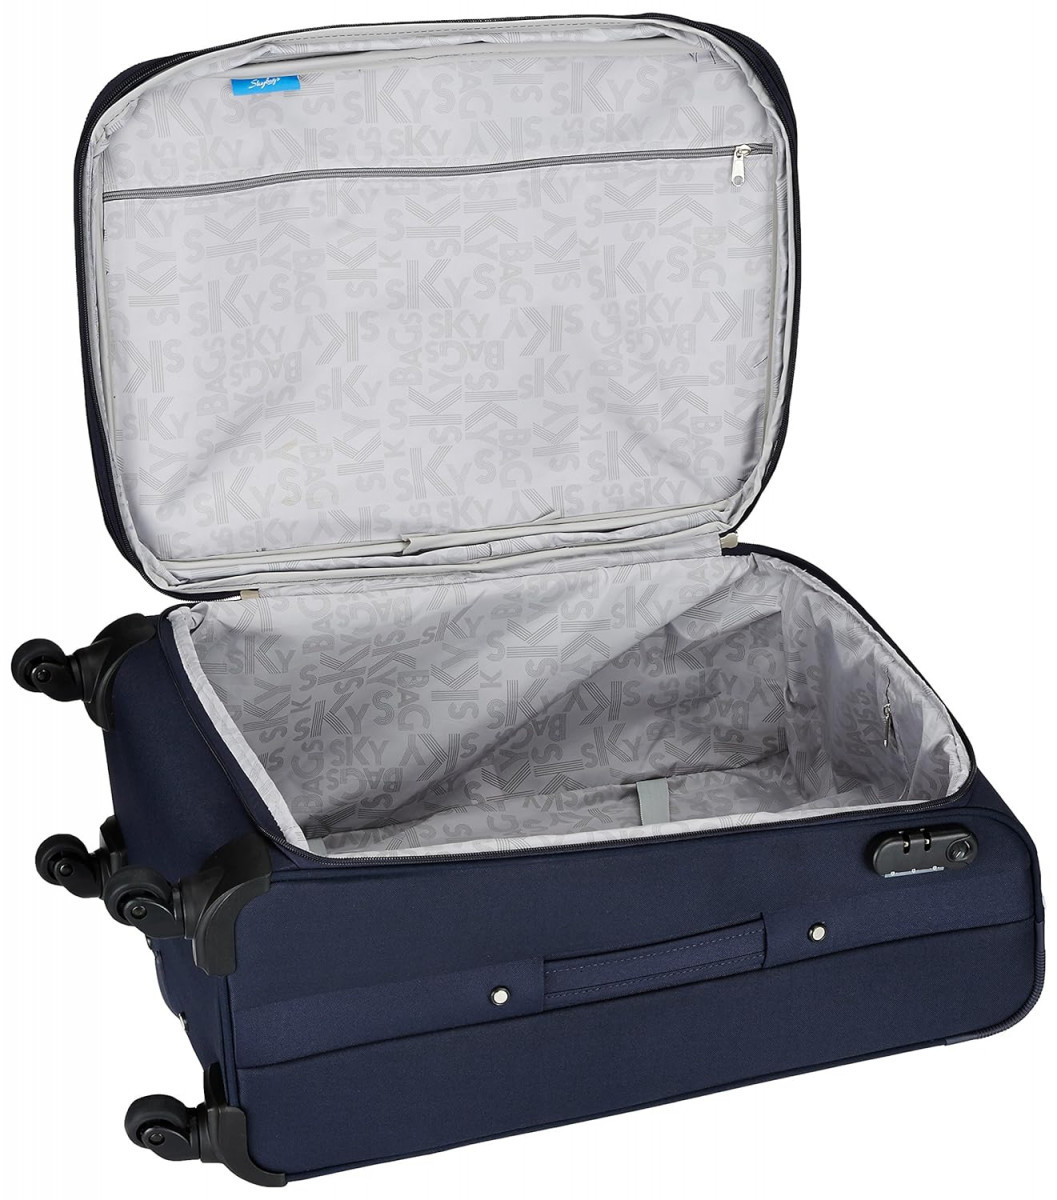 Skybags 68 cms Medium Check-in Polyester Soft Sided 4 Wheels Spinner LuggageSuitcaseTrolley Bag- Blue